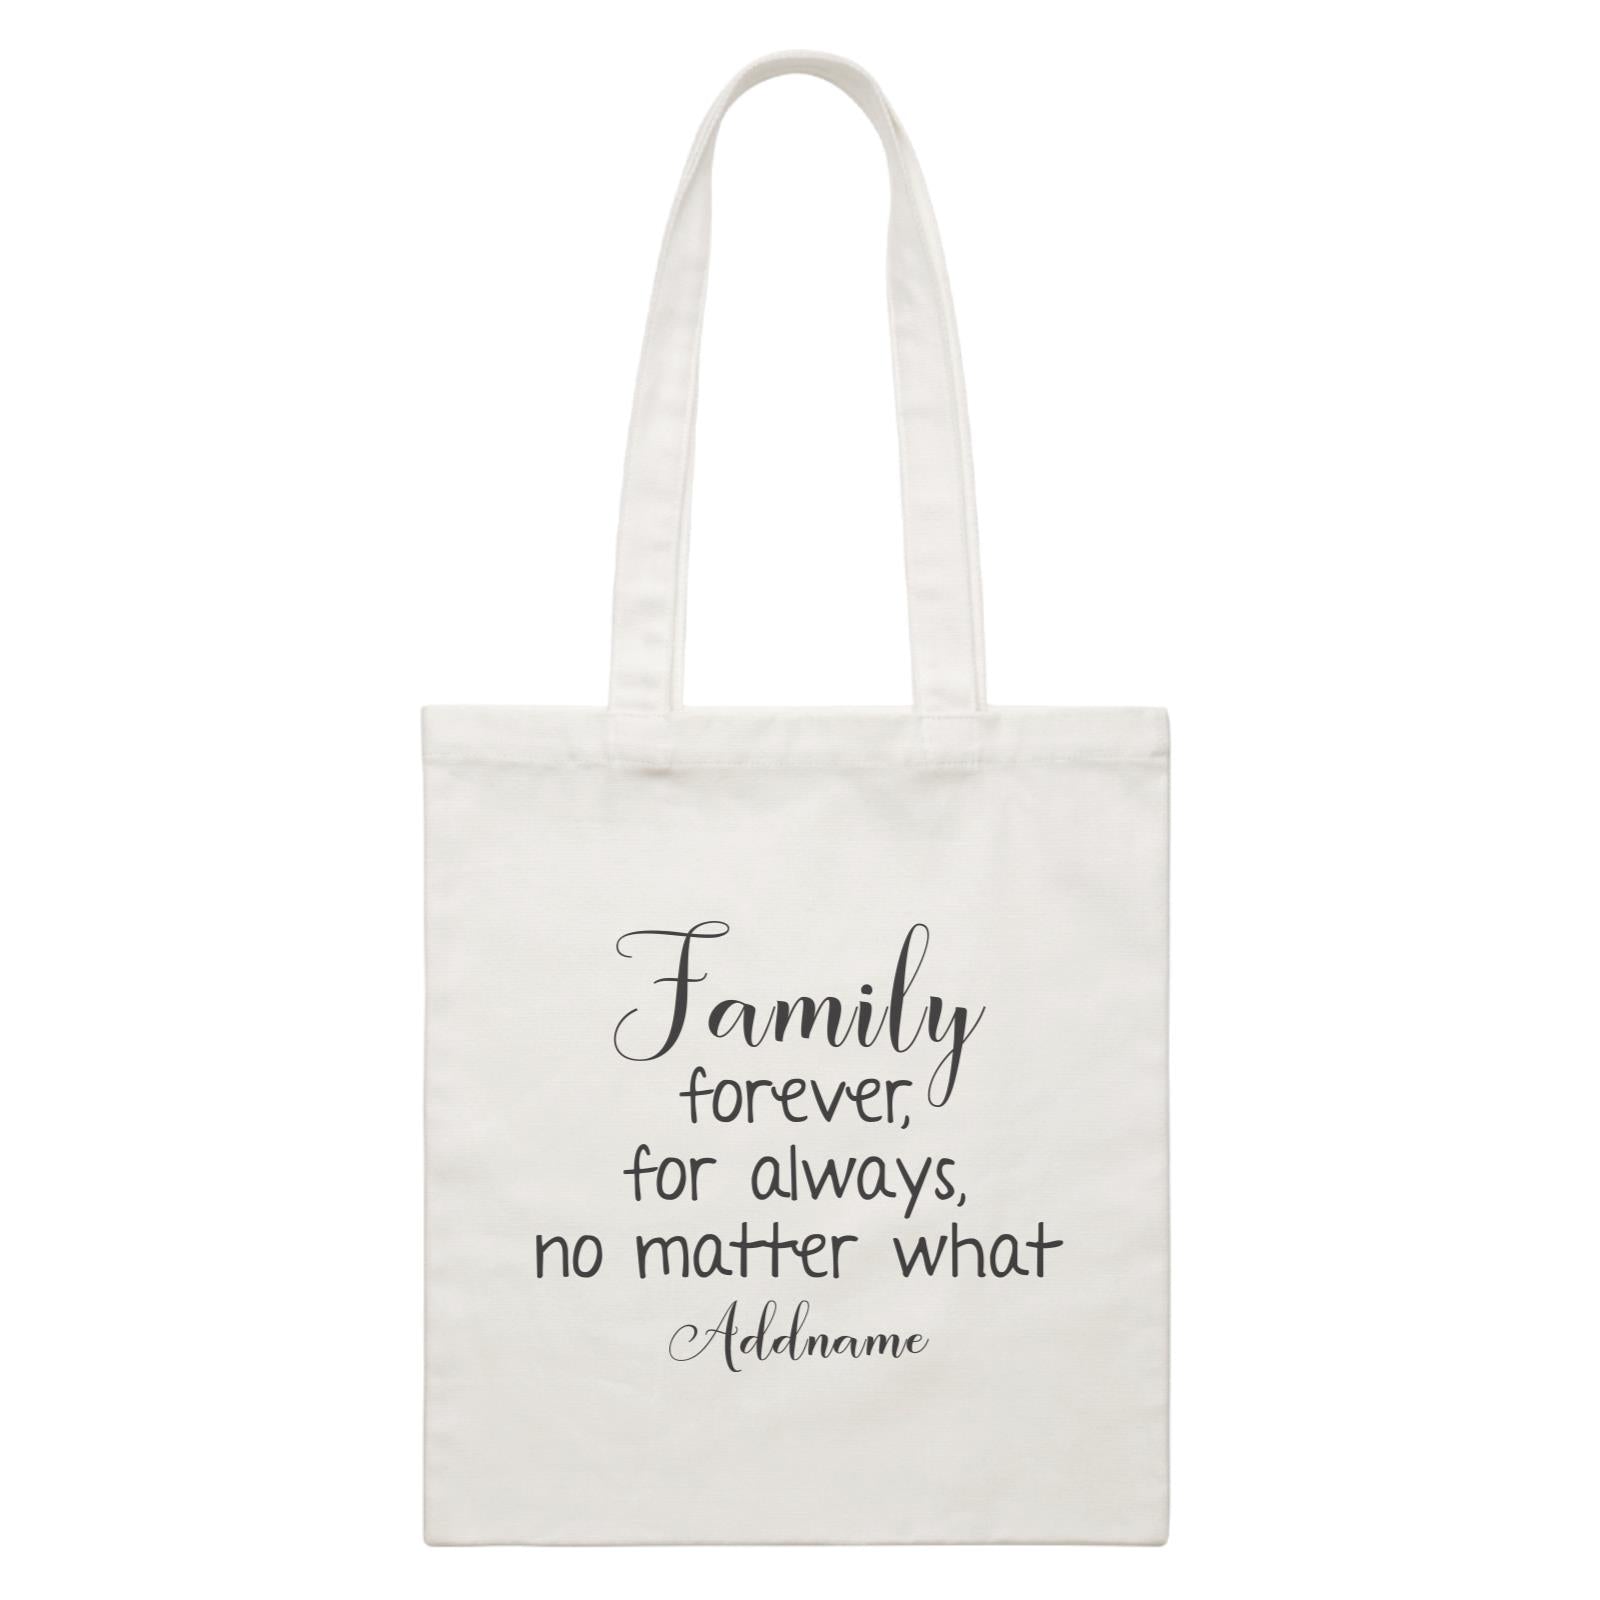 Family Is Everythings Quotes Family Forever For Always No Matter What Addname White Canvas Bag